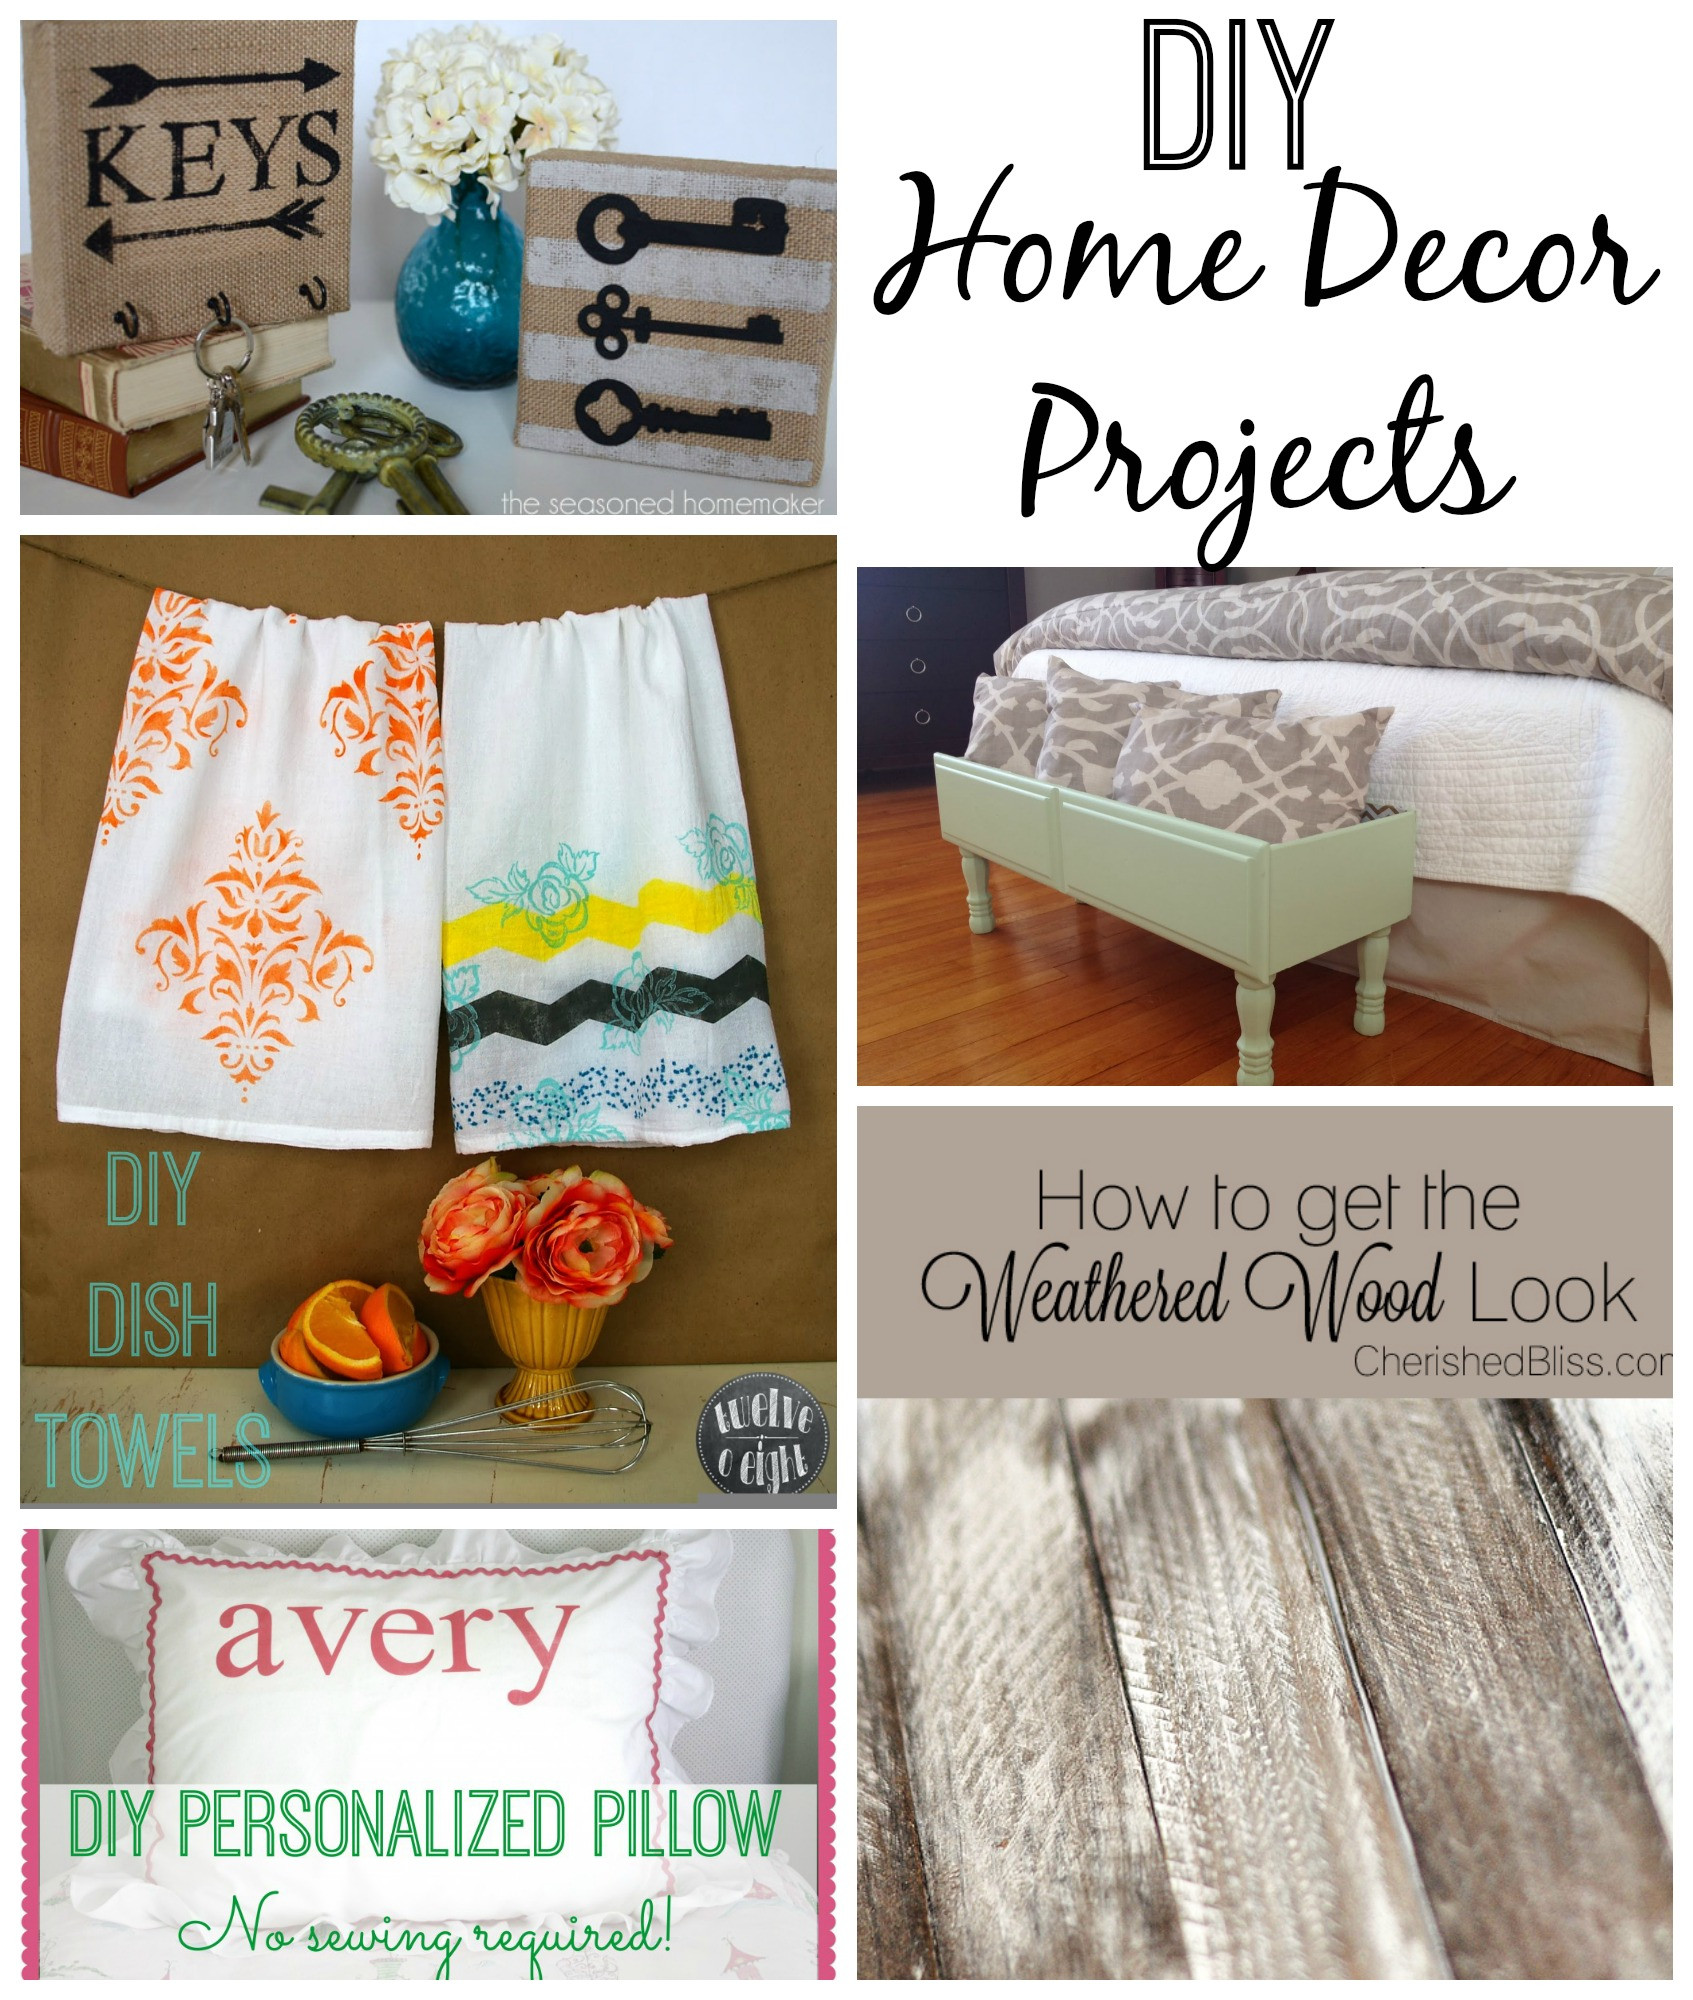 DIY Home Craft
 DIY Home Decor Projects